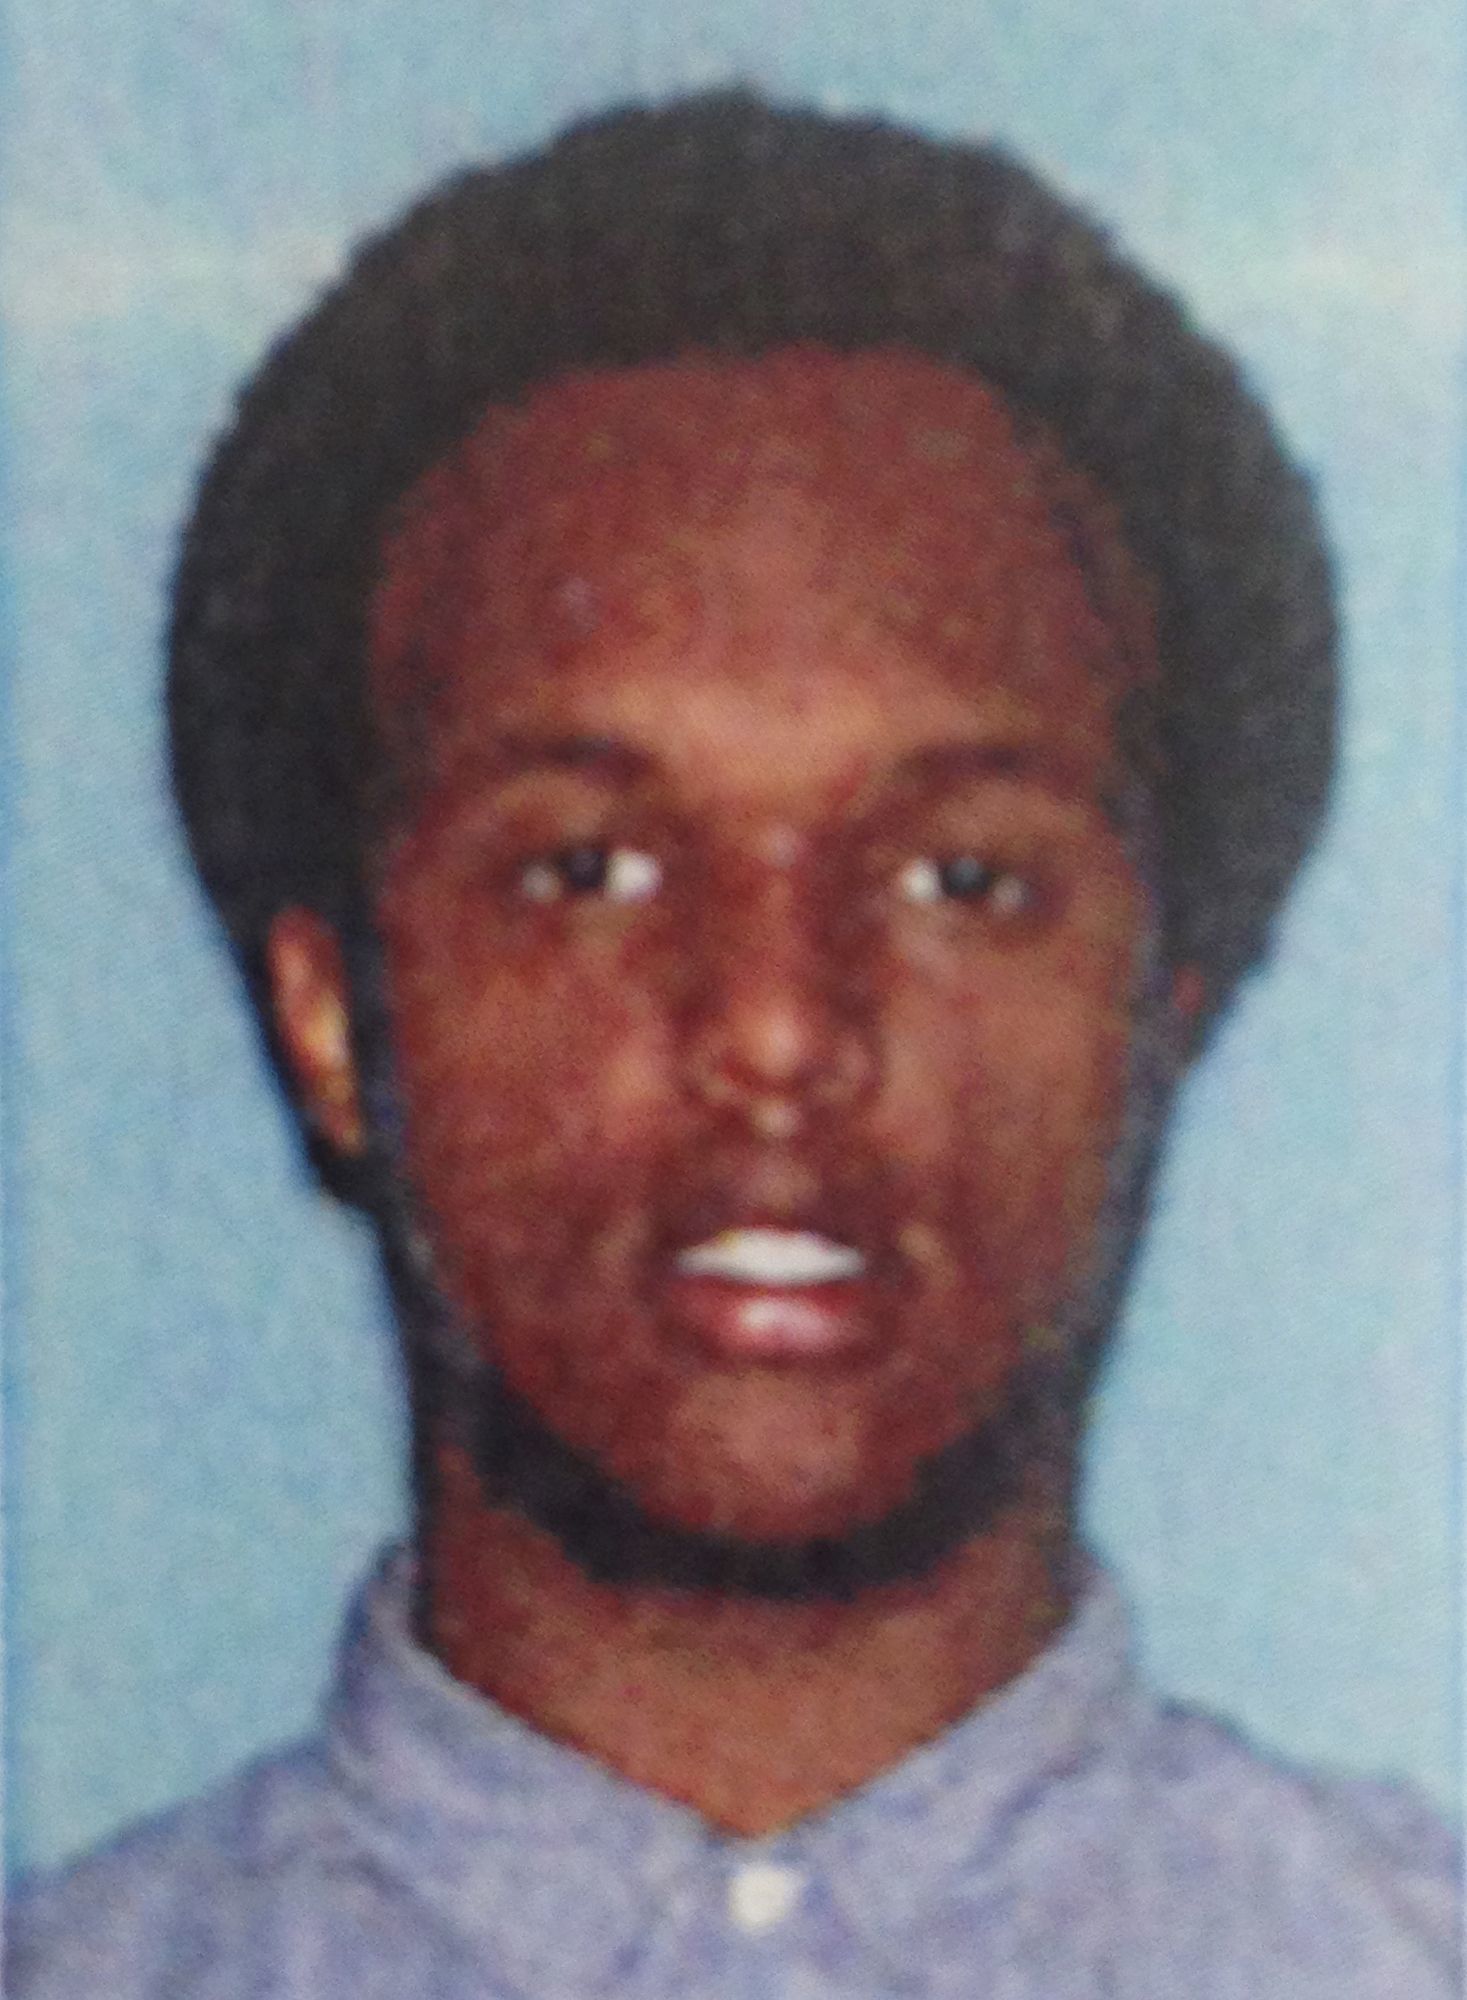 This undated photo provided by the U.S. Attorney’s Office shows Mohamed Roble, who is now believed to be in Syria with the Islamic State group.